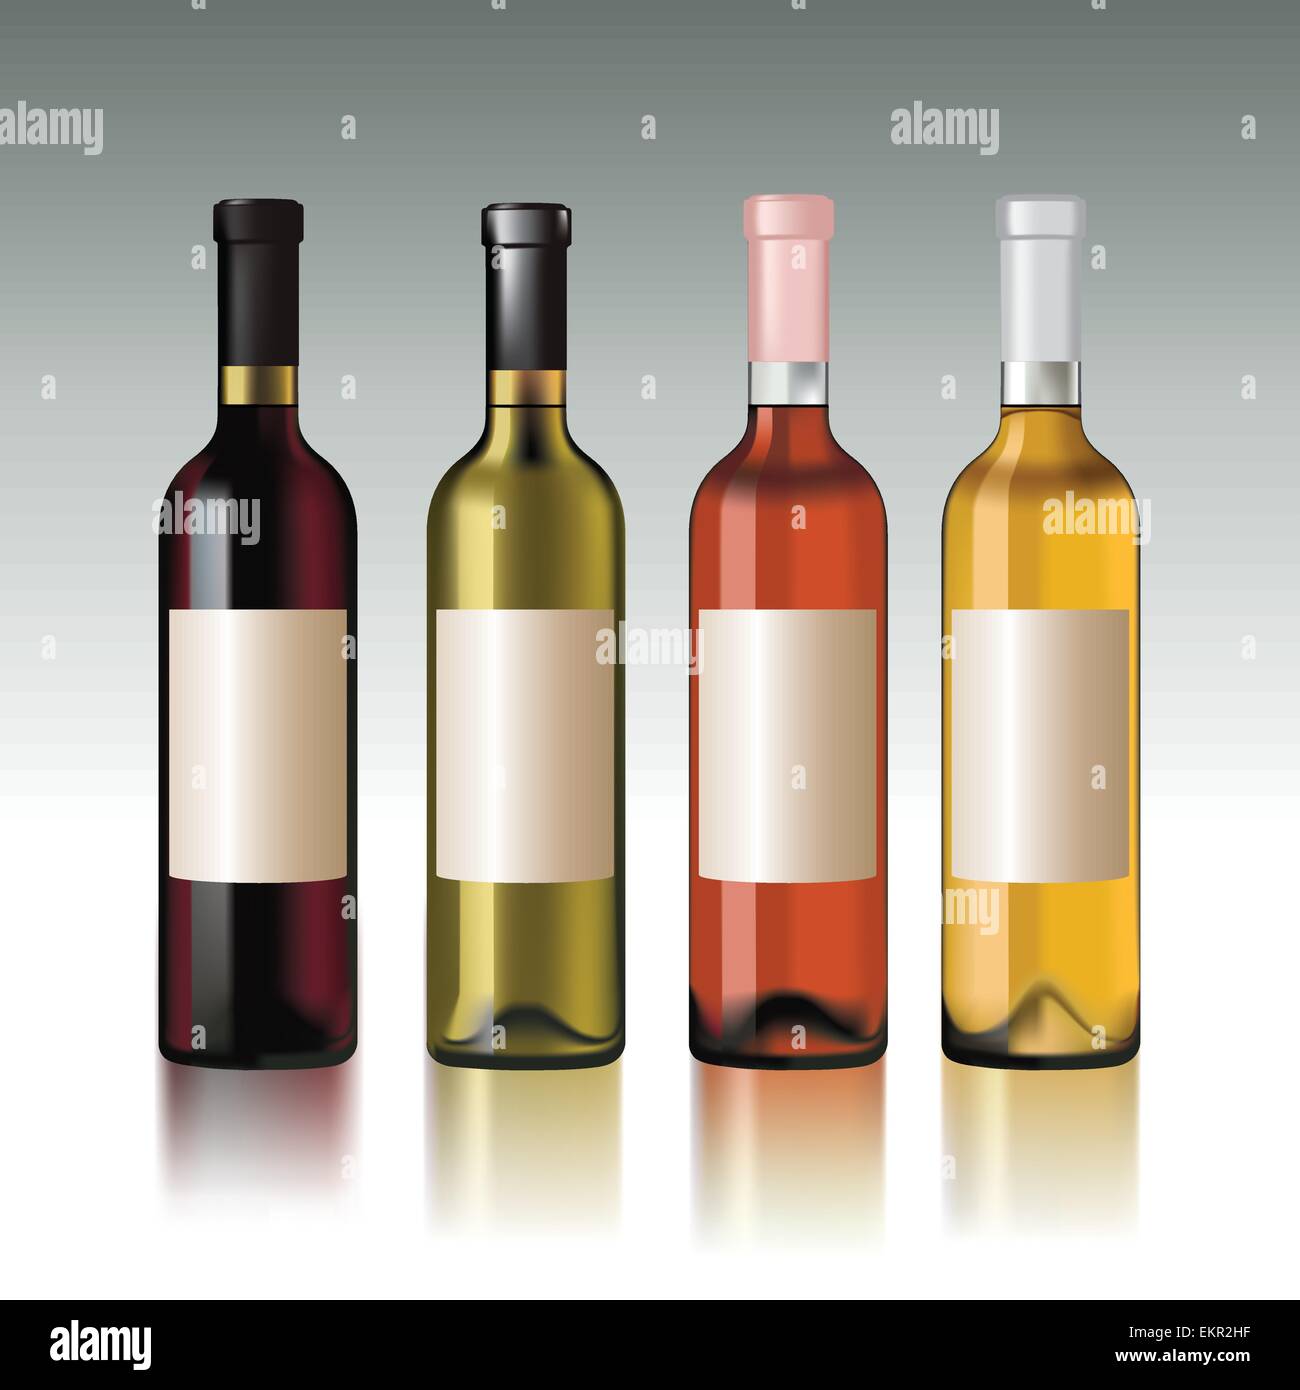 Set of wine bottles with empty labels. Vector illustration Stock Vector